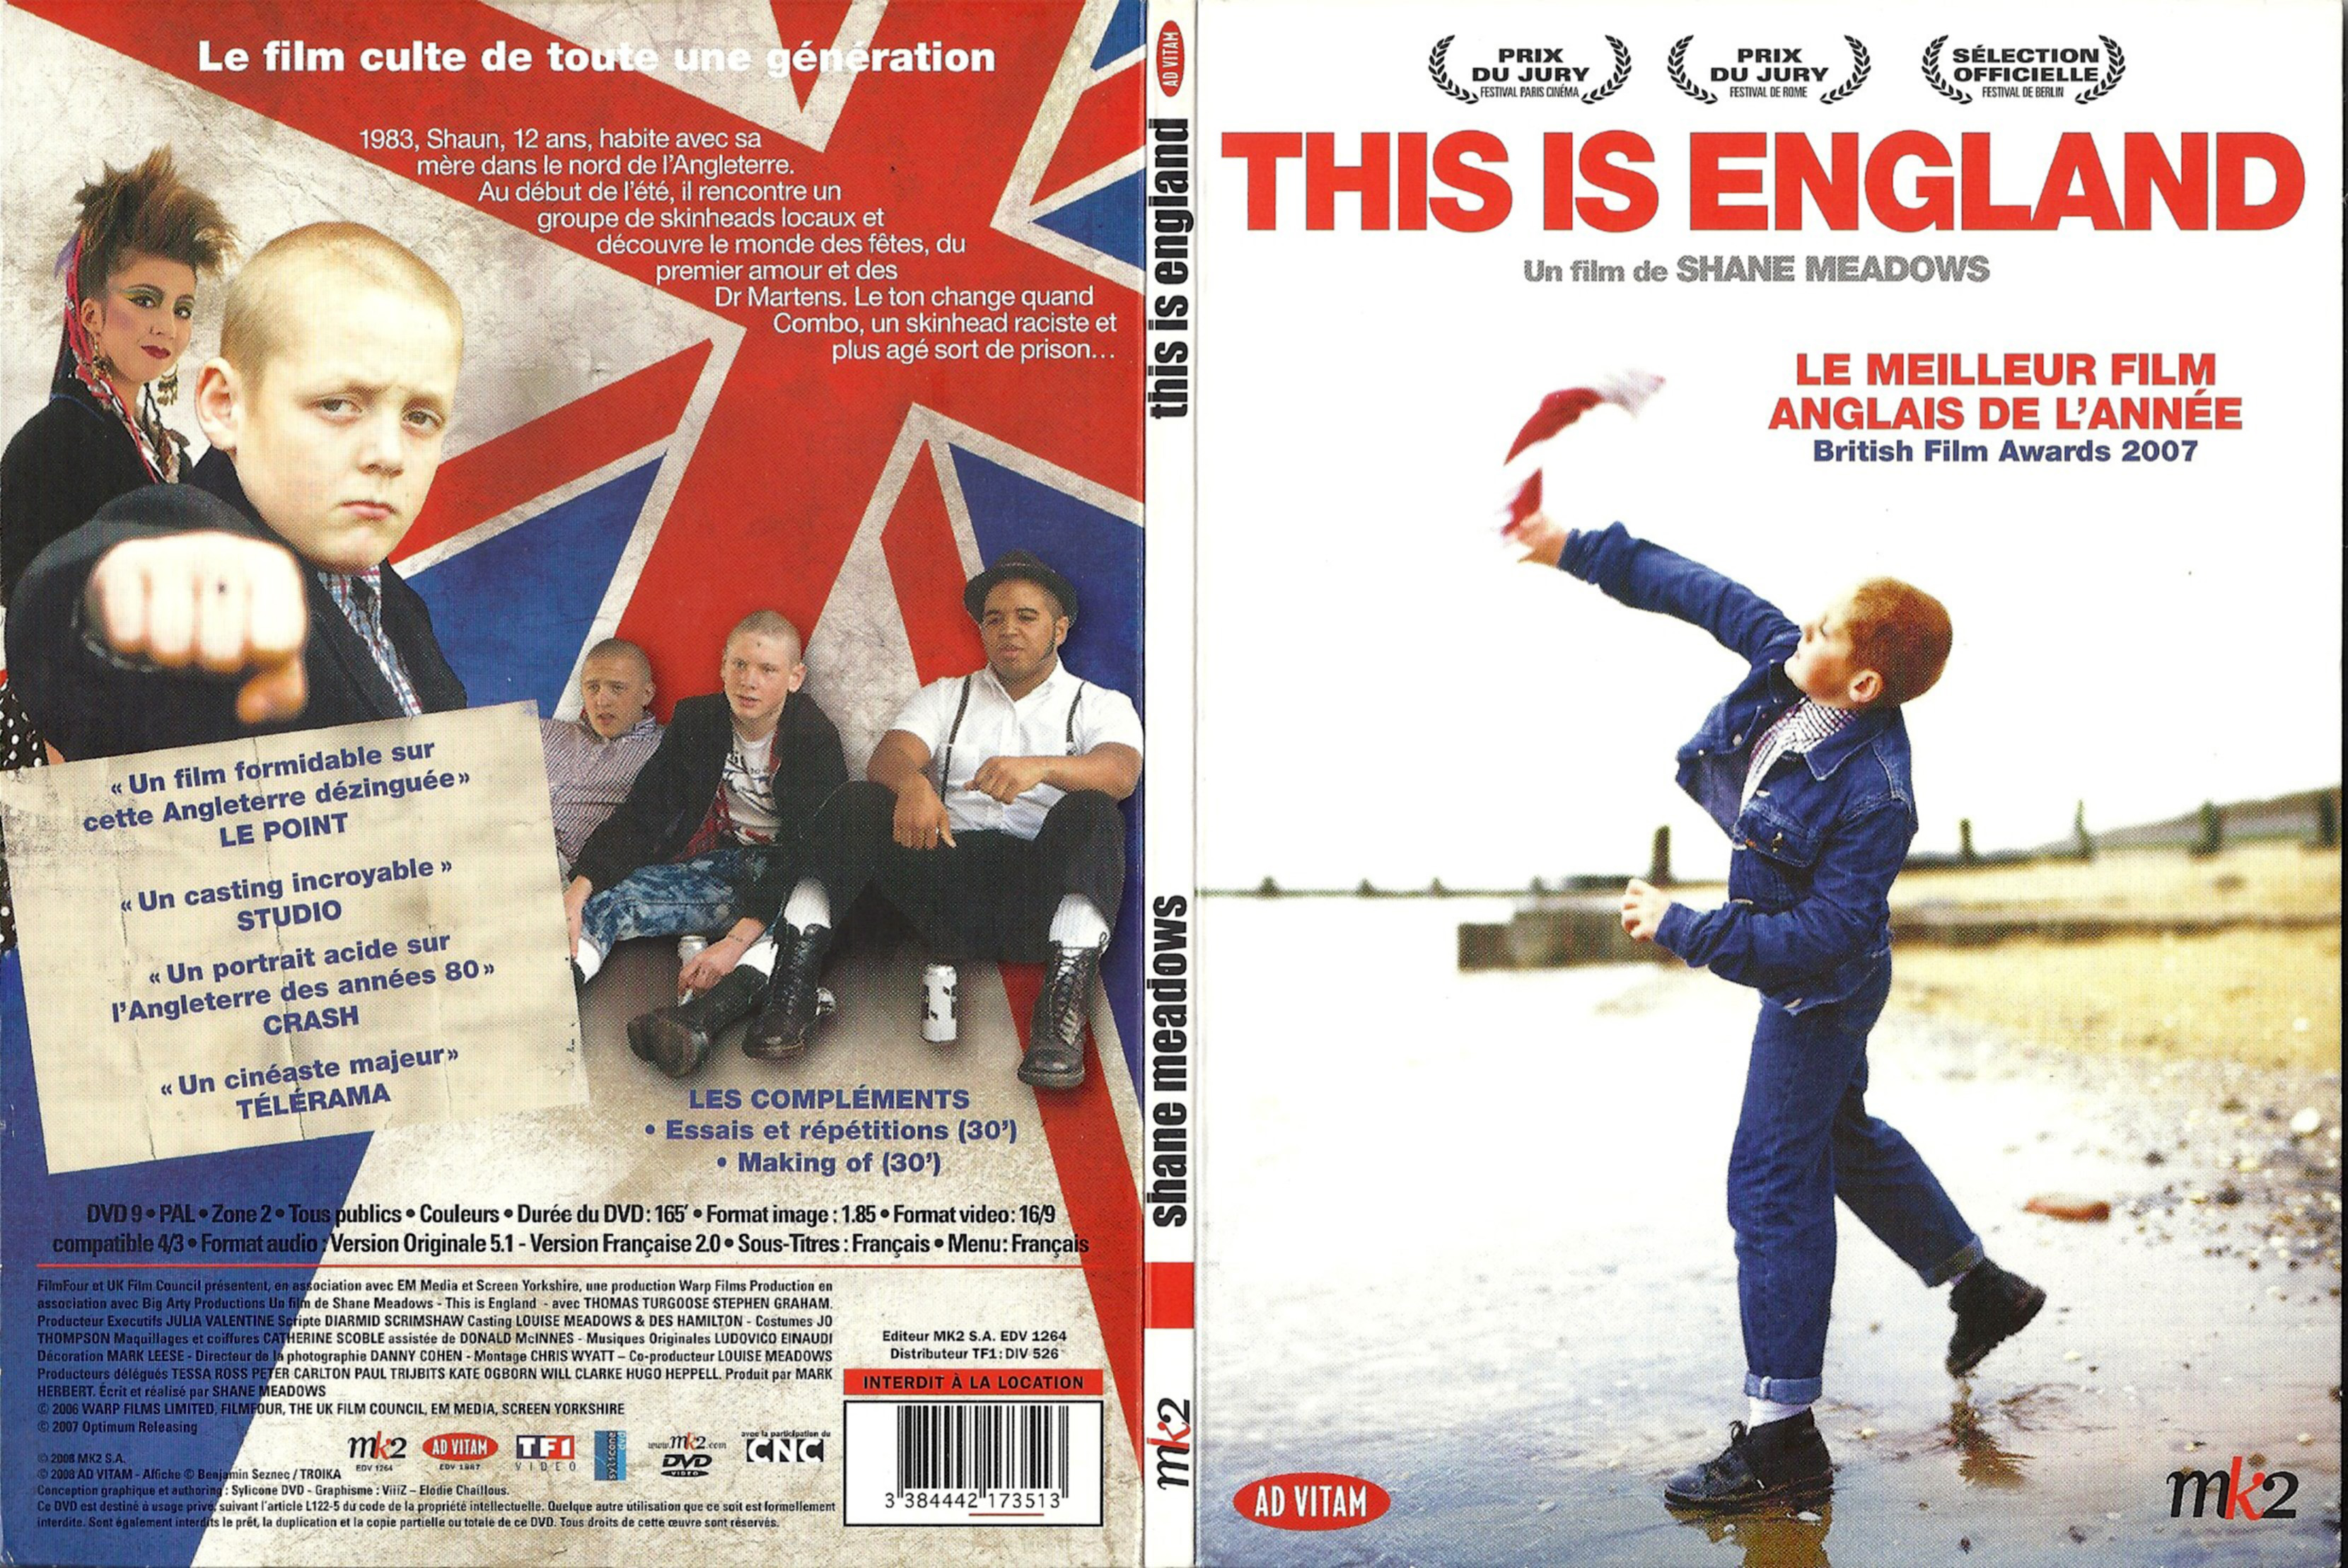 Jaquette DVD This is England